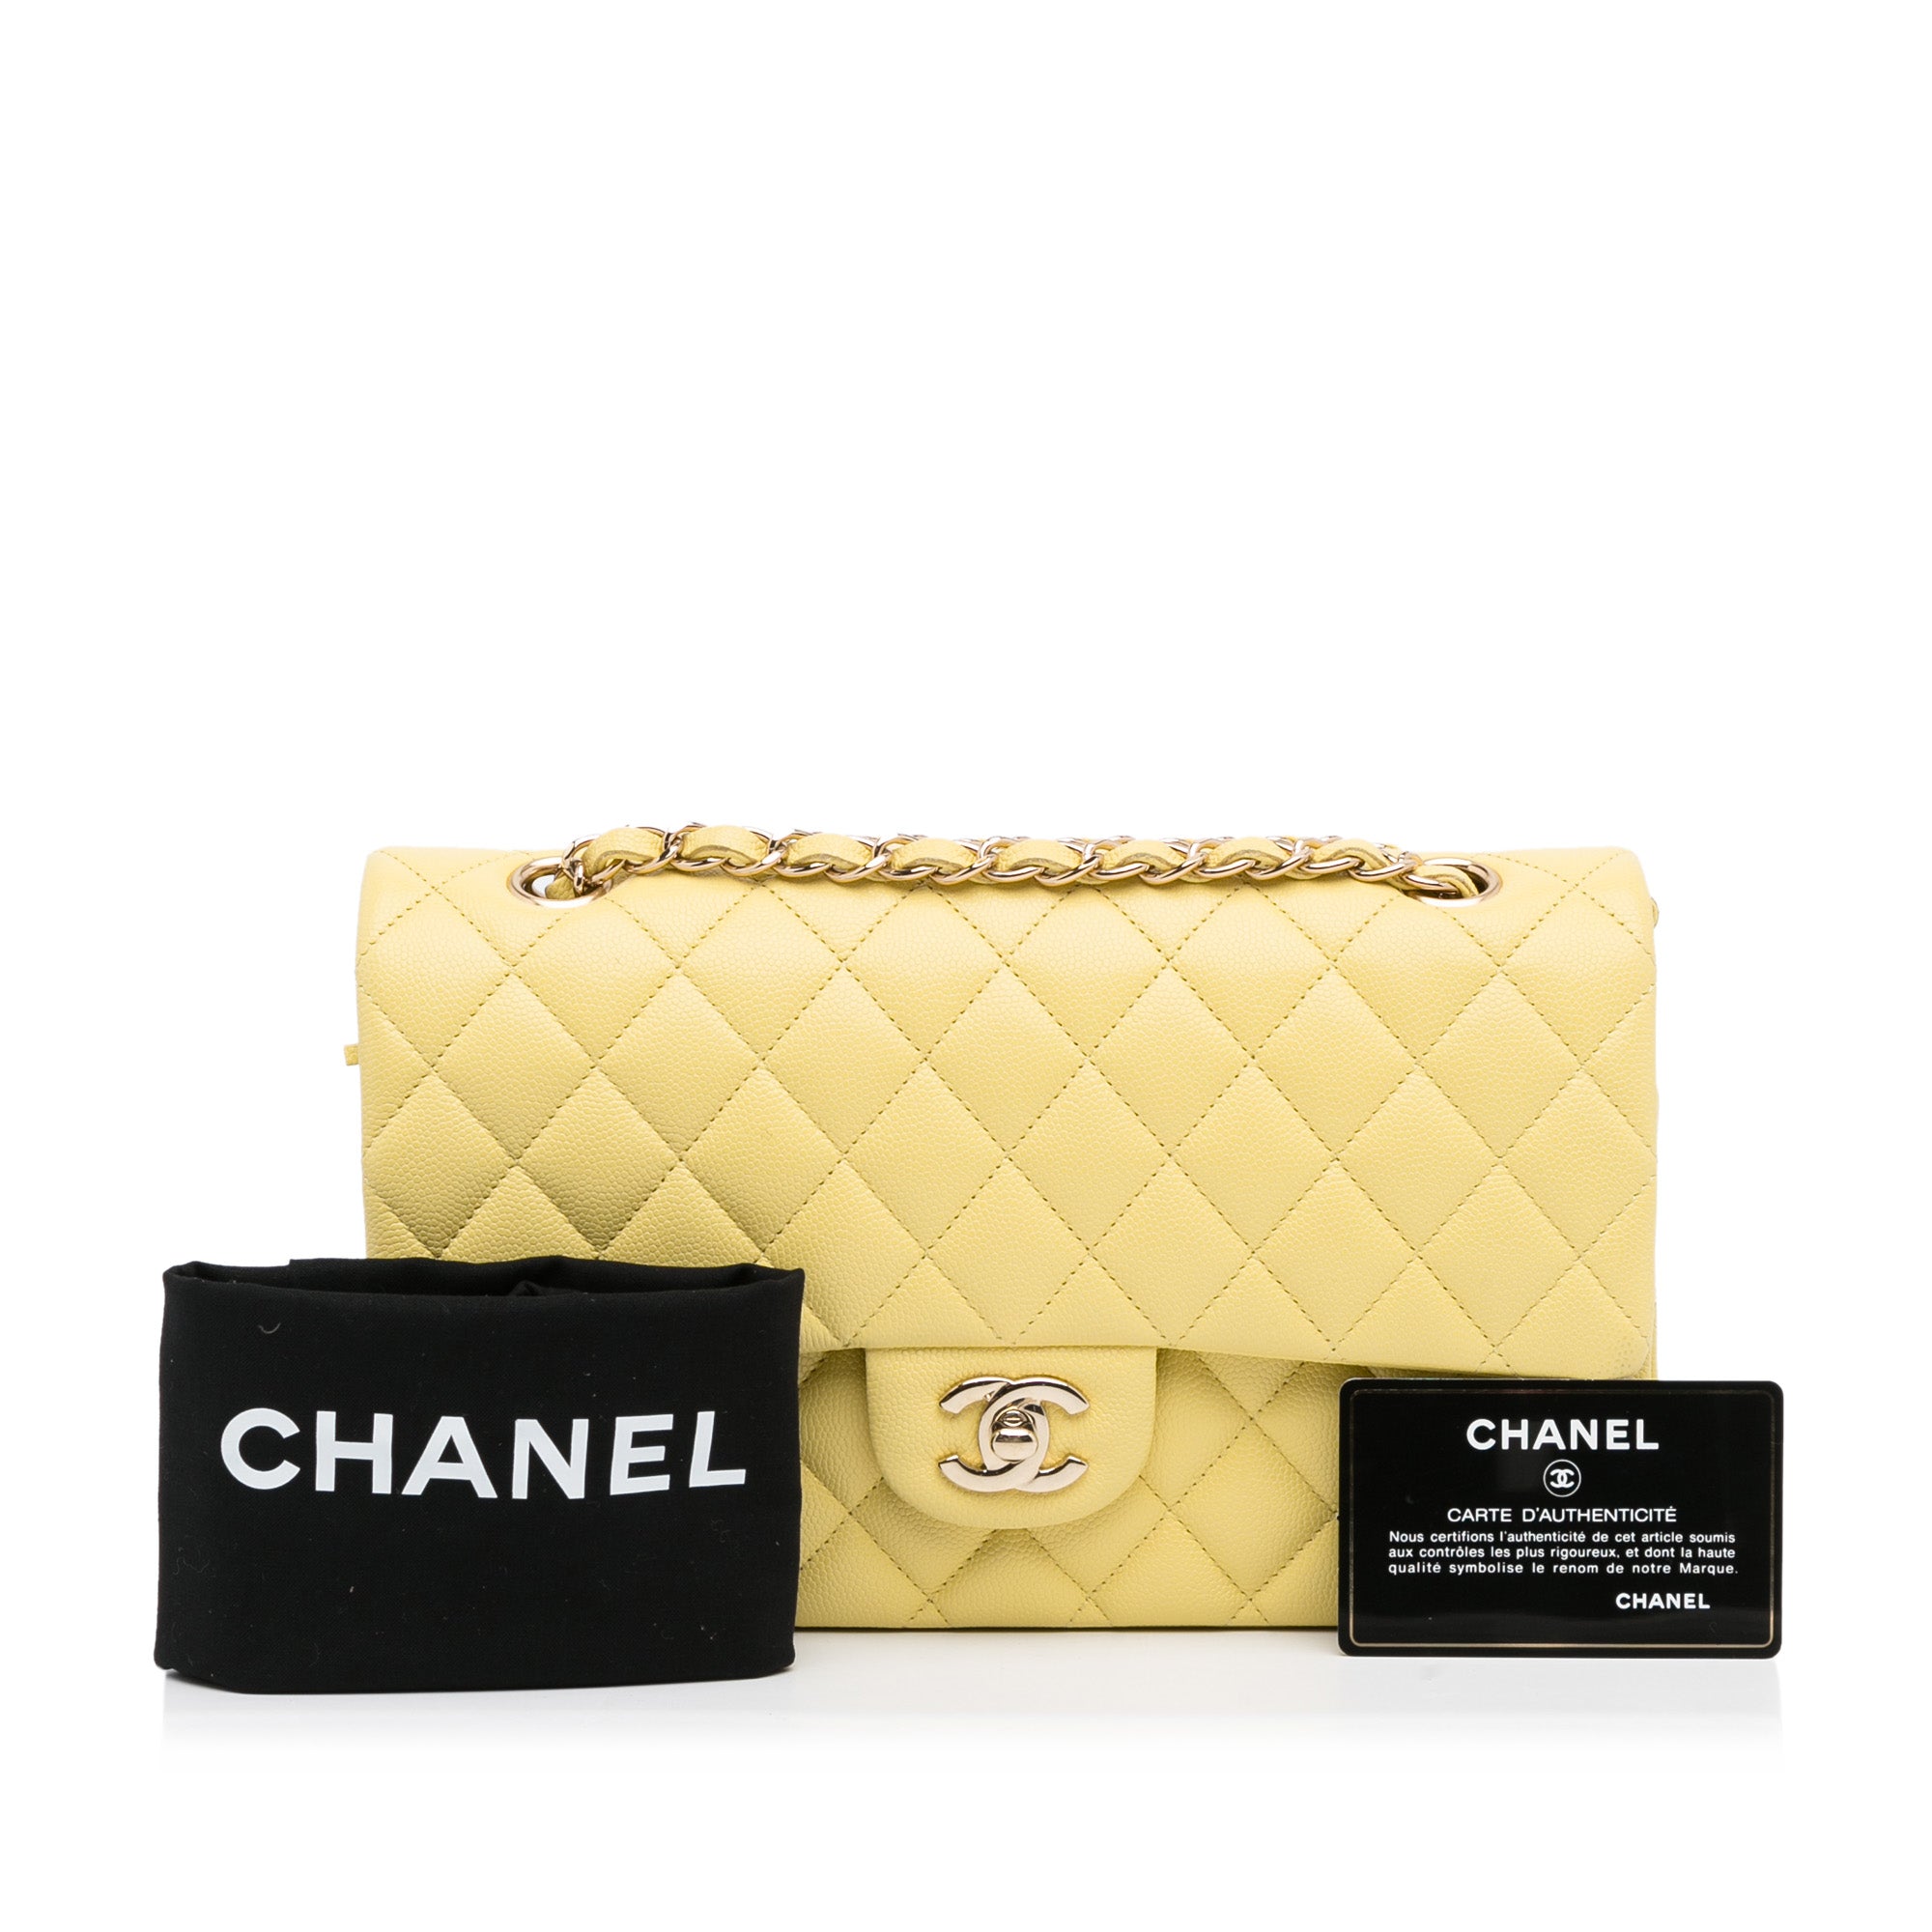 Chanel Yellow Leather 2.55 Double Flap Bag